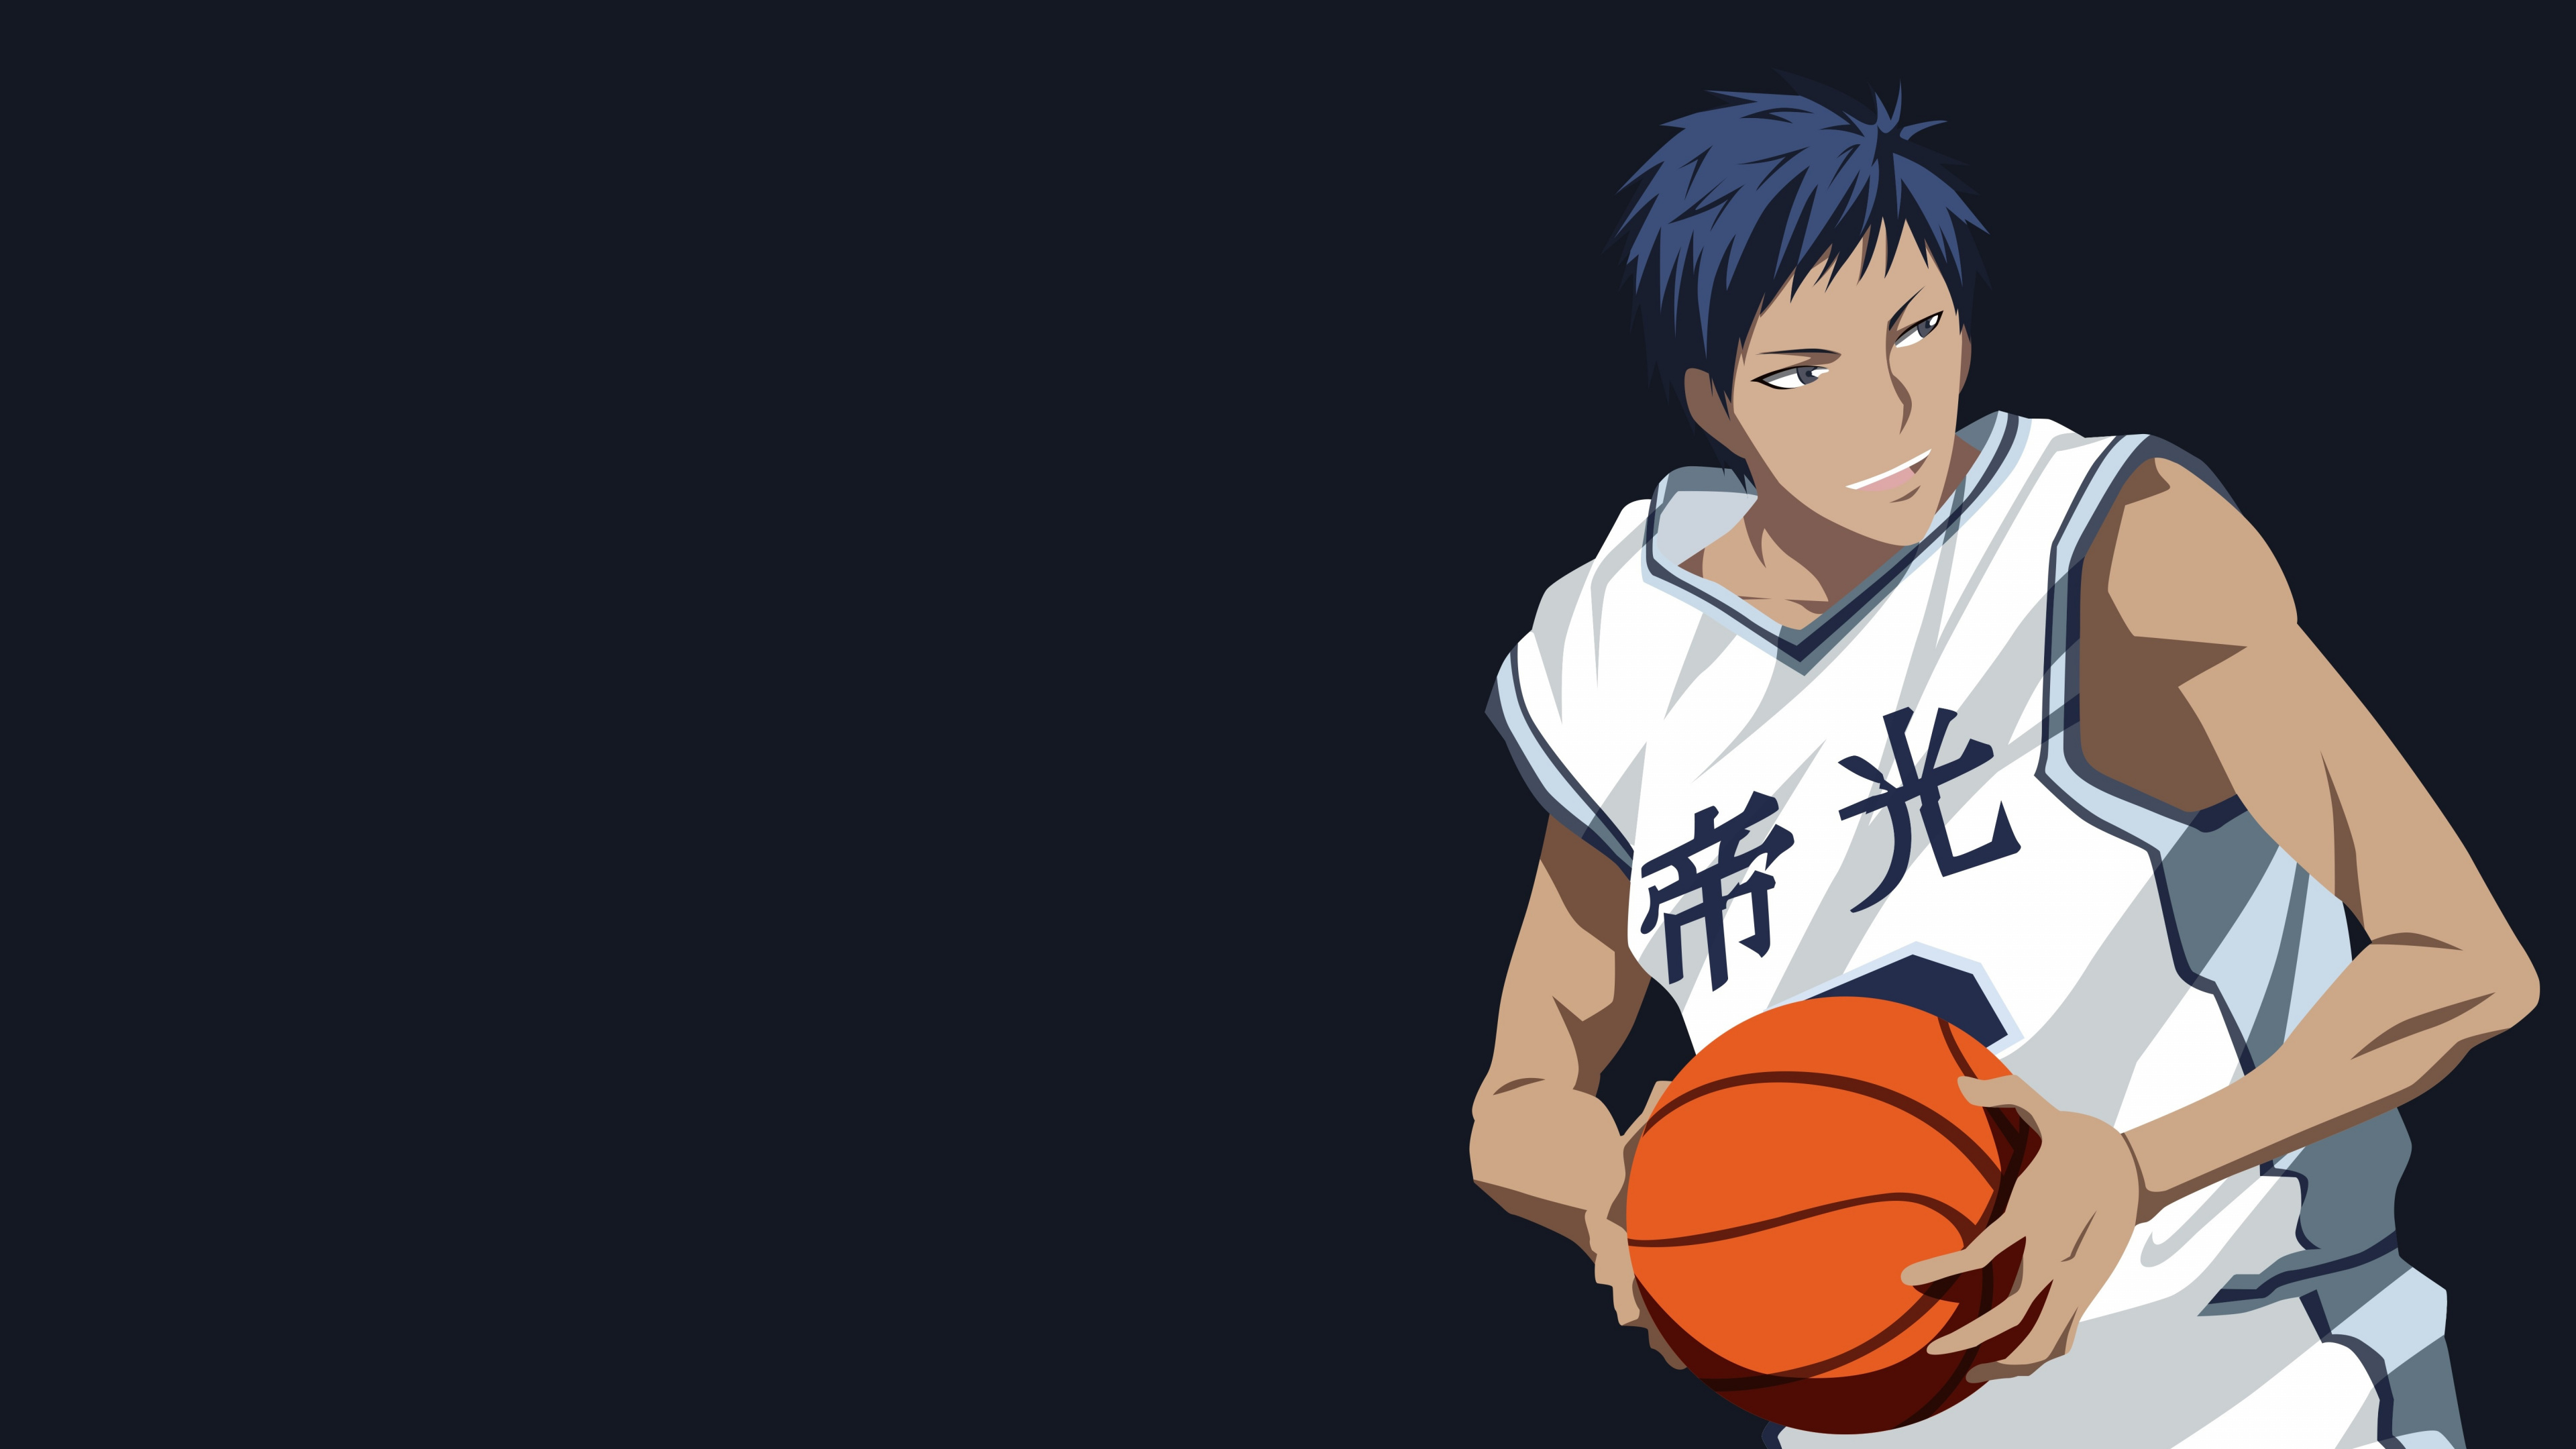 Personnage D'anime Masculin Aux Cheveux Noirs Tenant le Basket-ball. Wallpaper in 3840x2160 Resolution